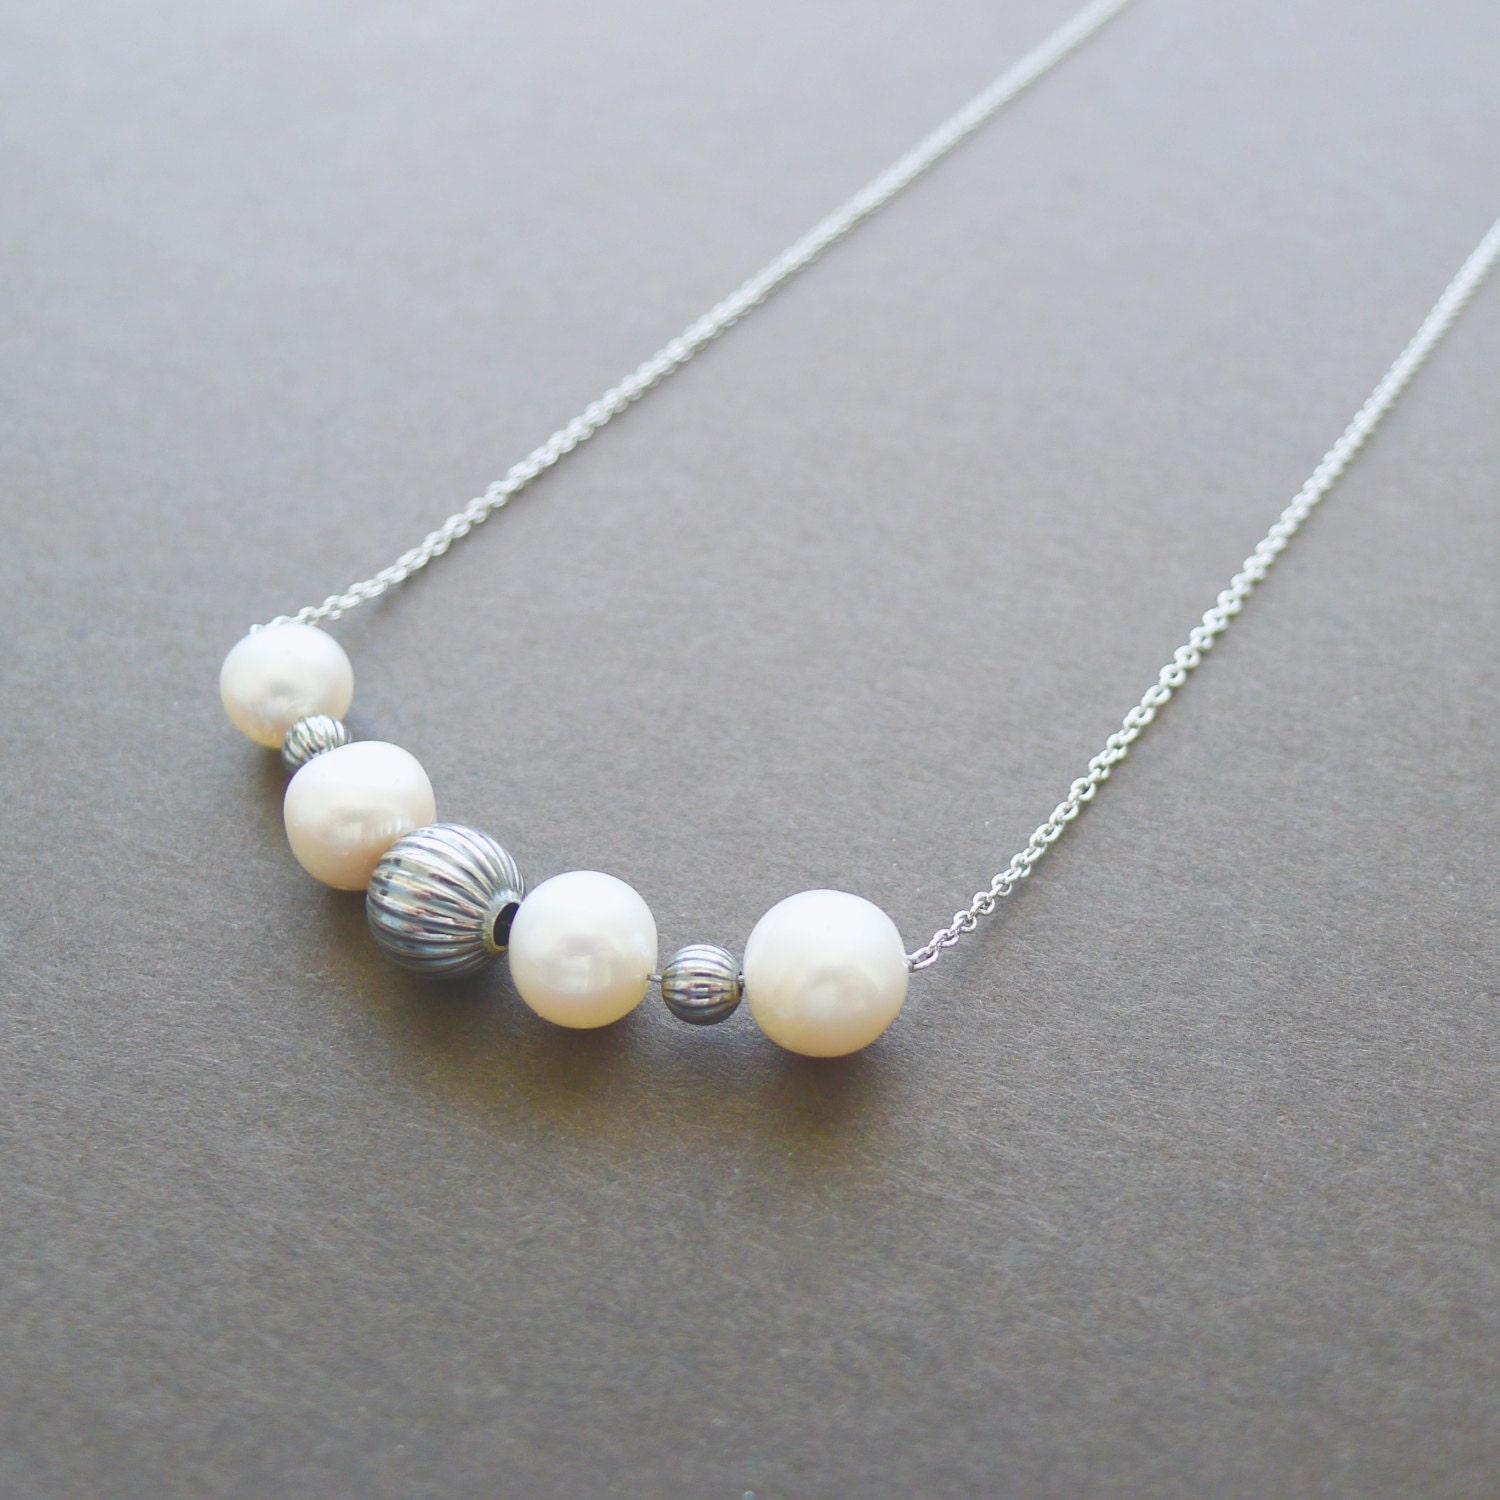 Sterling Silver Minimalist Necklace, Modern Pearl Necklace, Pearl Necklace, Simple Necklace, Minimalist Jewelry, Freshwater Pearls